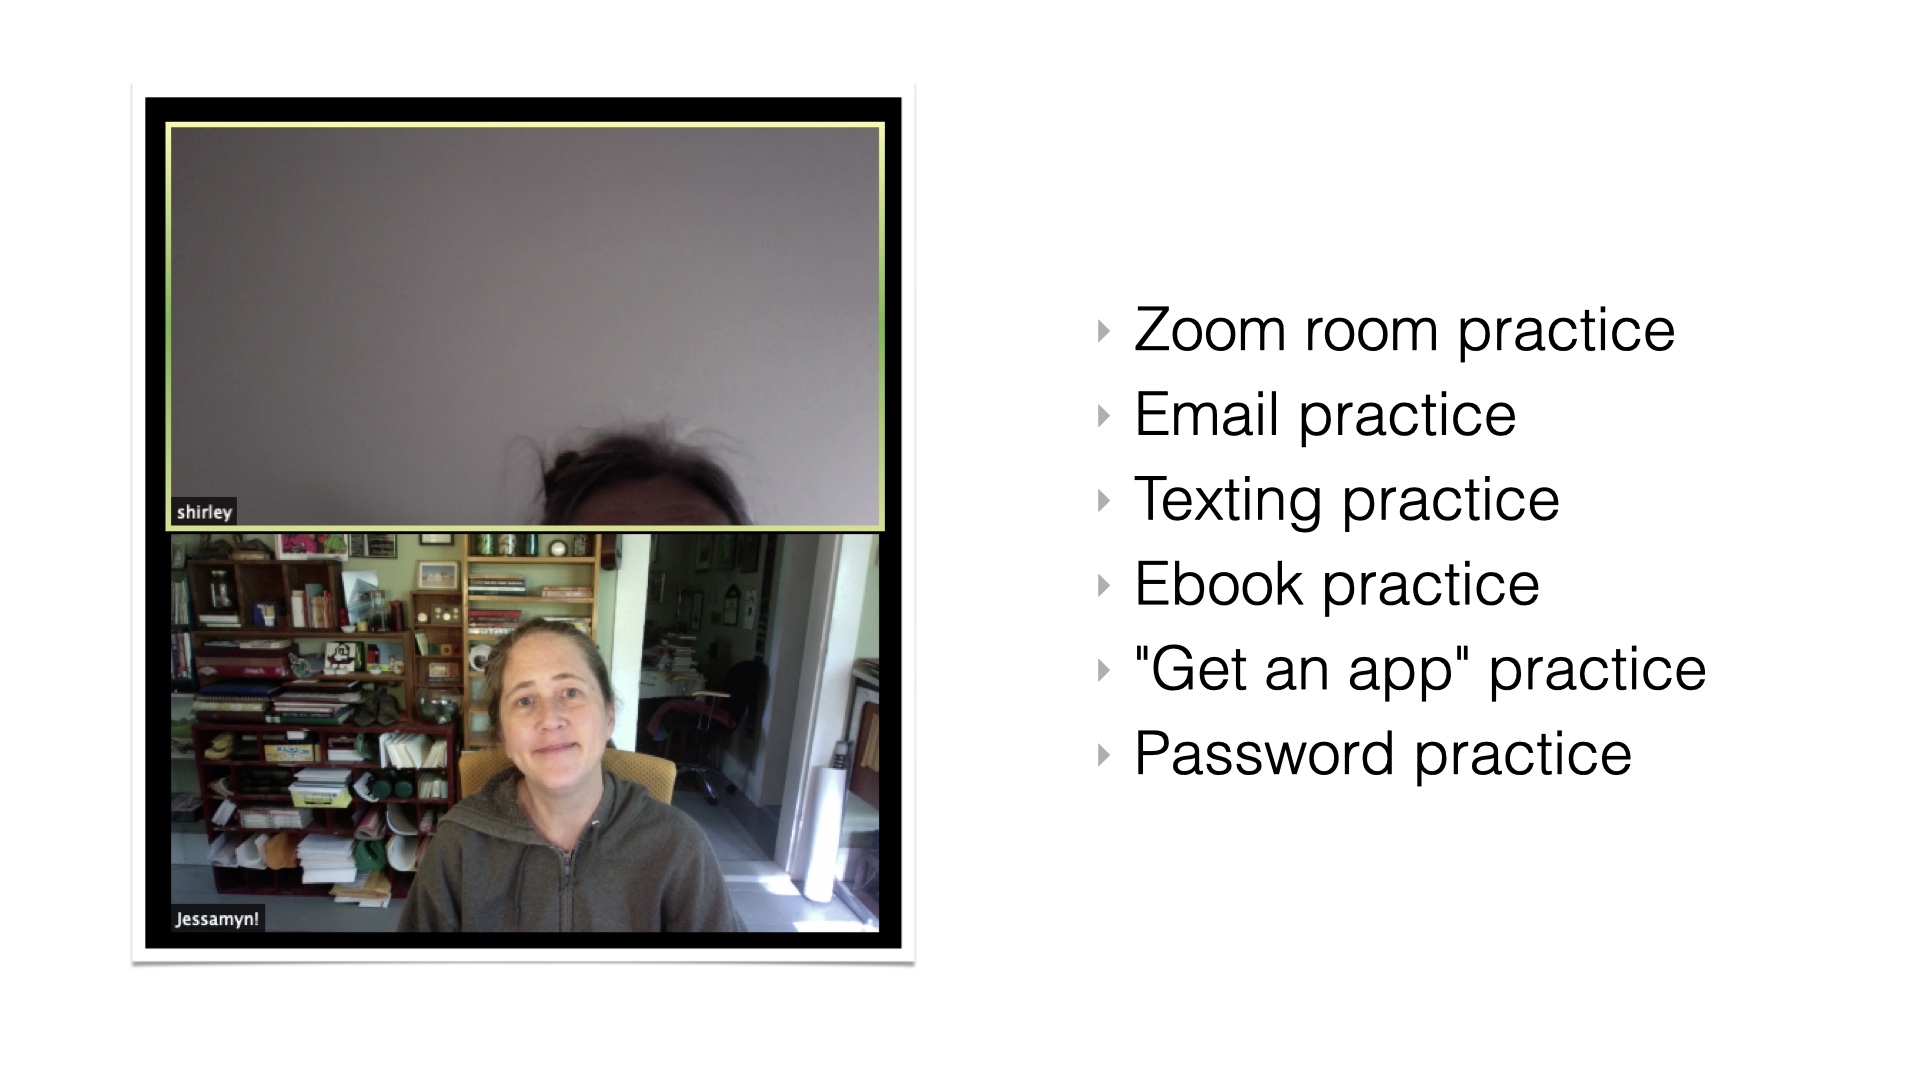 Zoom screenshot showing me in the lower pane and the top of Shirley's head in the top pane. Bulleted list: - Zoom room practice
- Email practice
- Texting practice
- Ebook practice
-'Get an app' practice
- Password practice